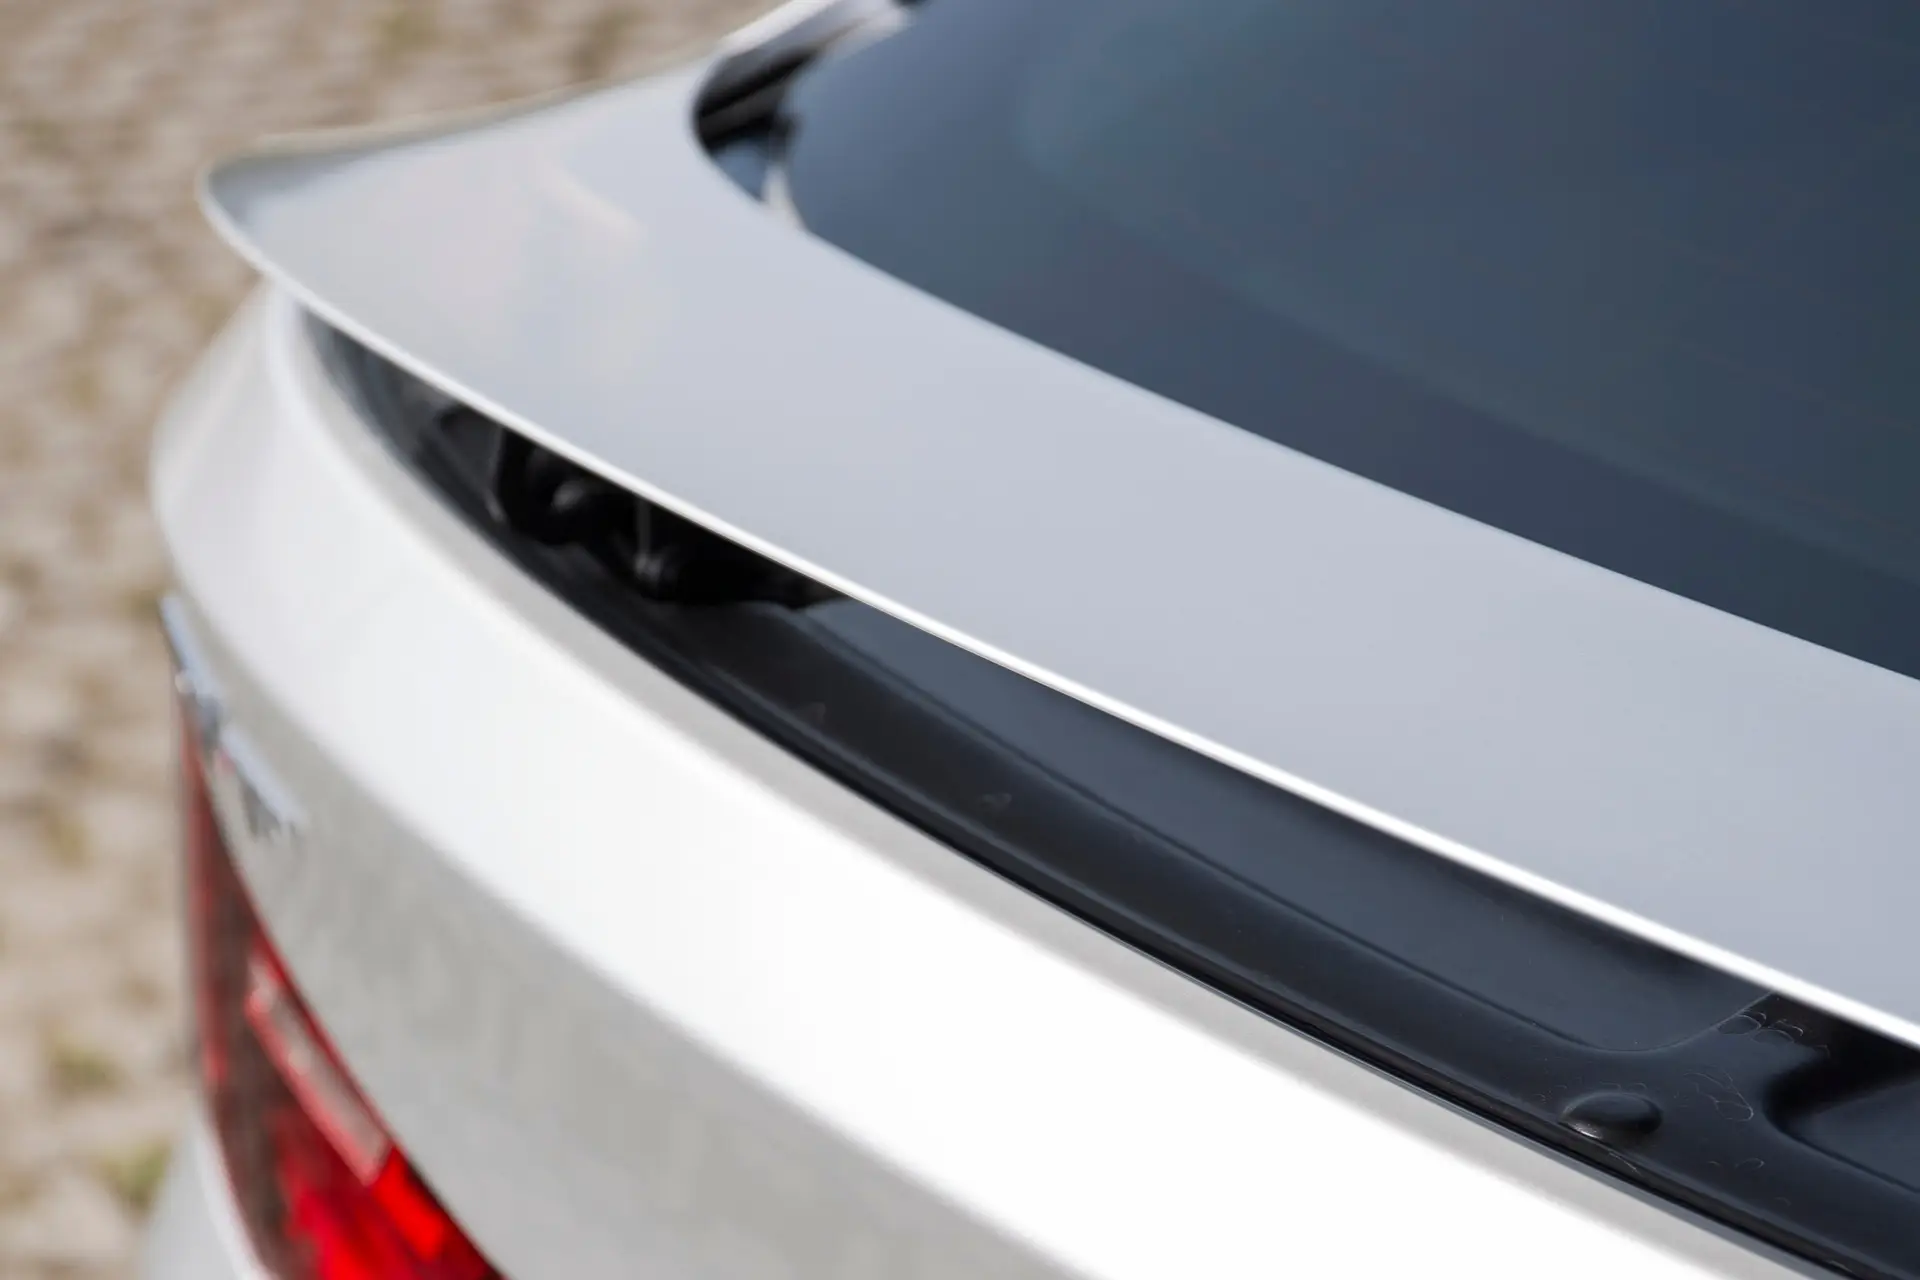 BMW 3 Series GT (2013-2020) Review: exterior close up photo of the BMW 3 Series GT spoiler